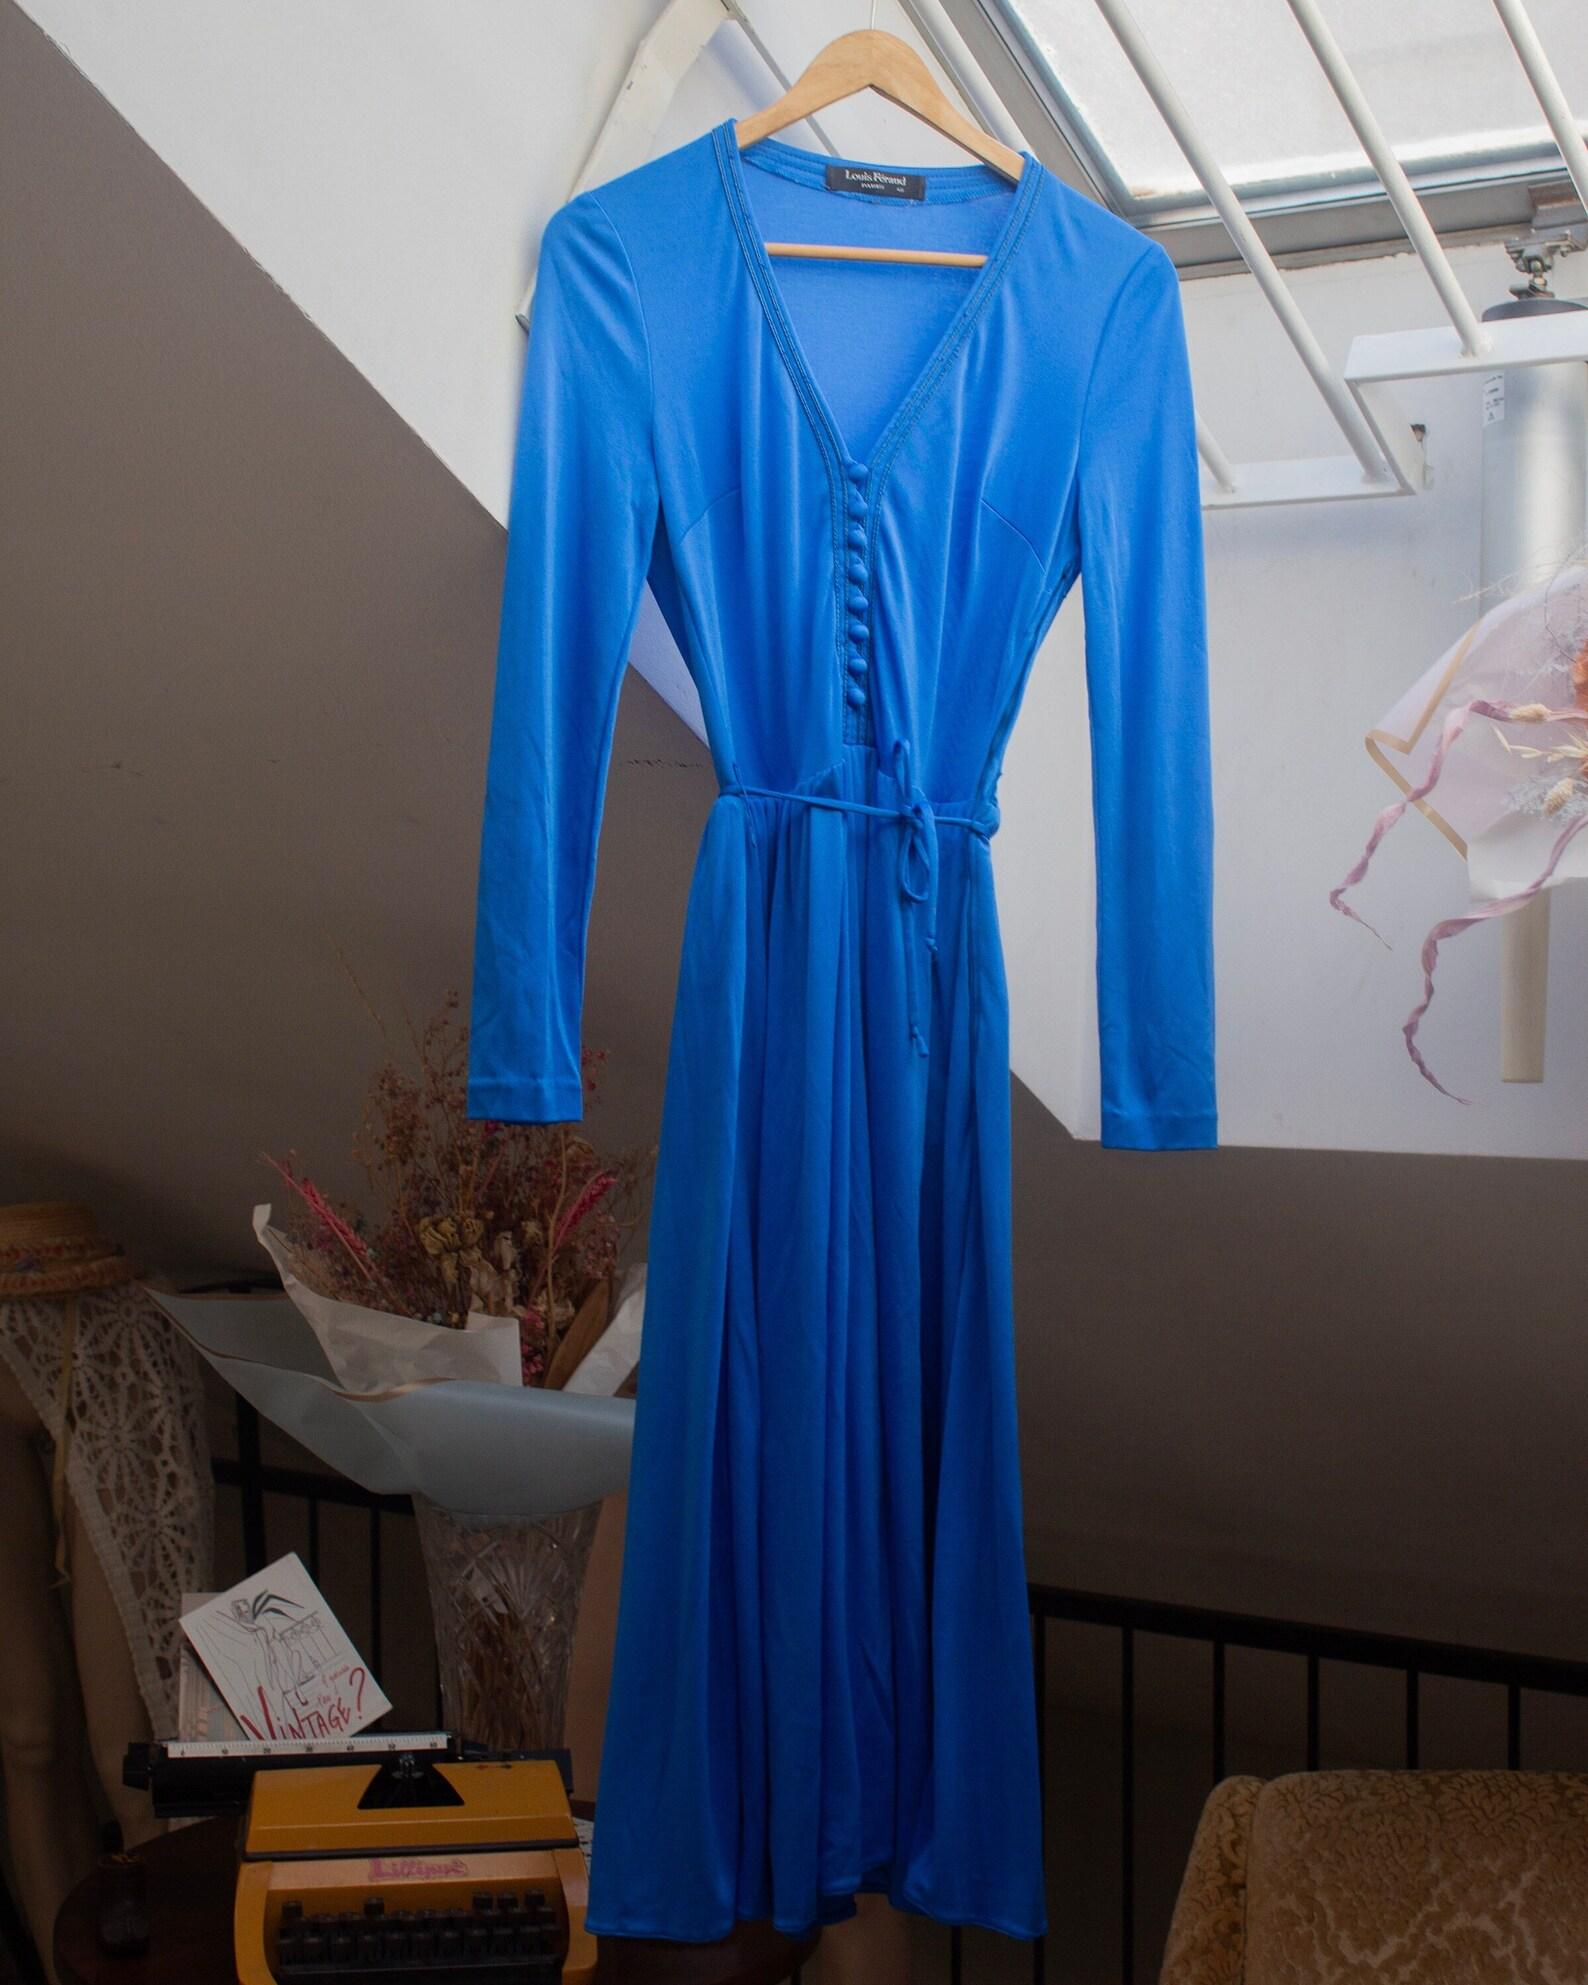 Louis Féraud Paris 1970's Klein blue jersey deep V neck button up midi flare dress with long sleeves, belt and side pockets (S)
Side zip, belt and buttons closure
Skirt is lined 
Side pockets
Size S, check the measurements below
Very good vintage